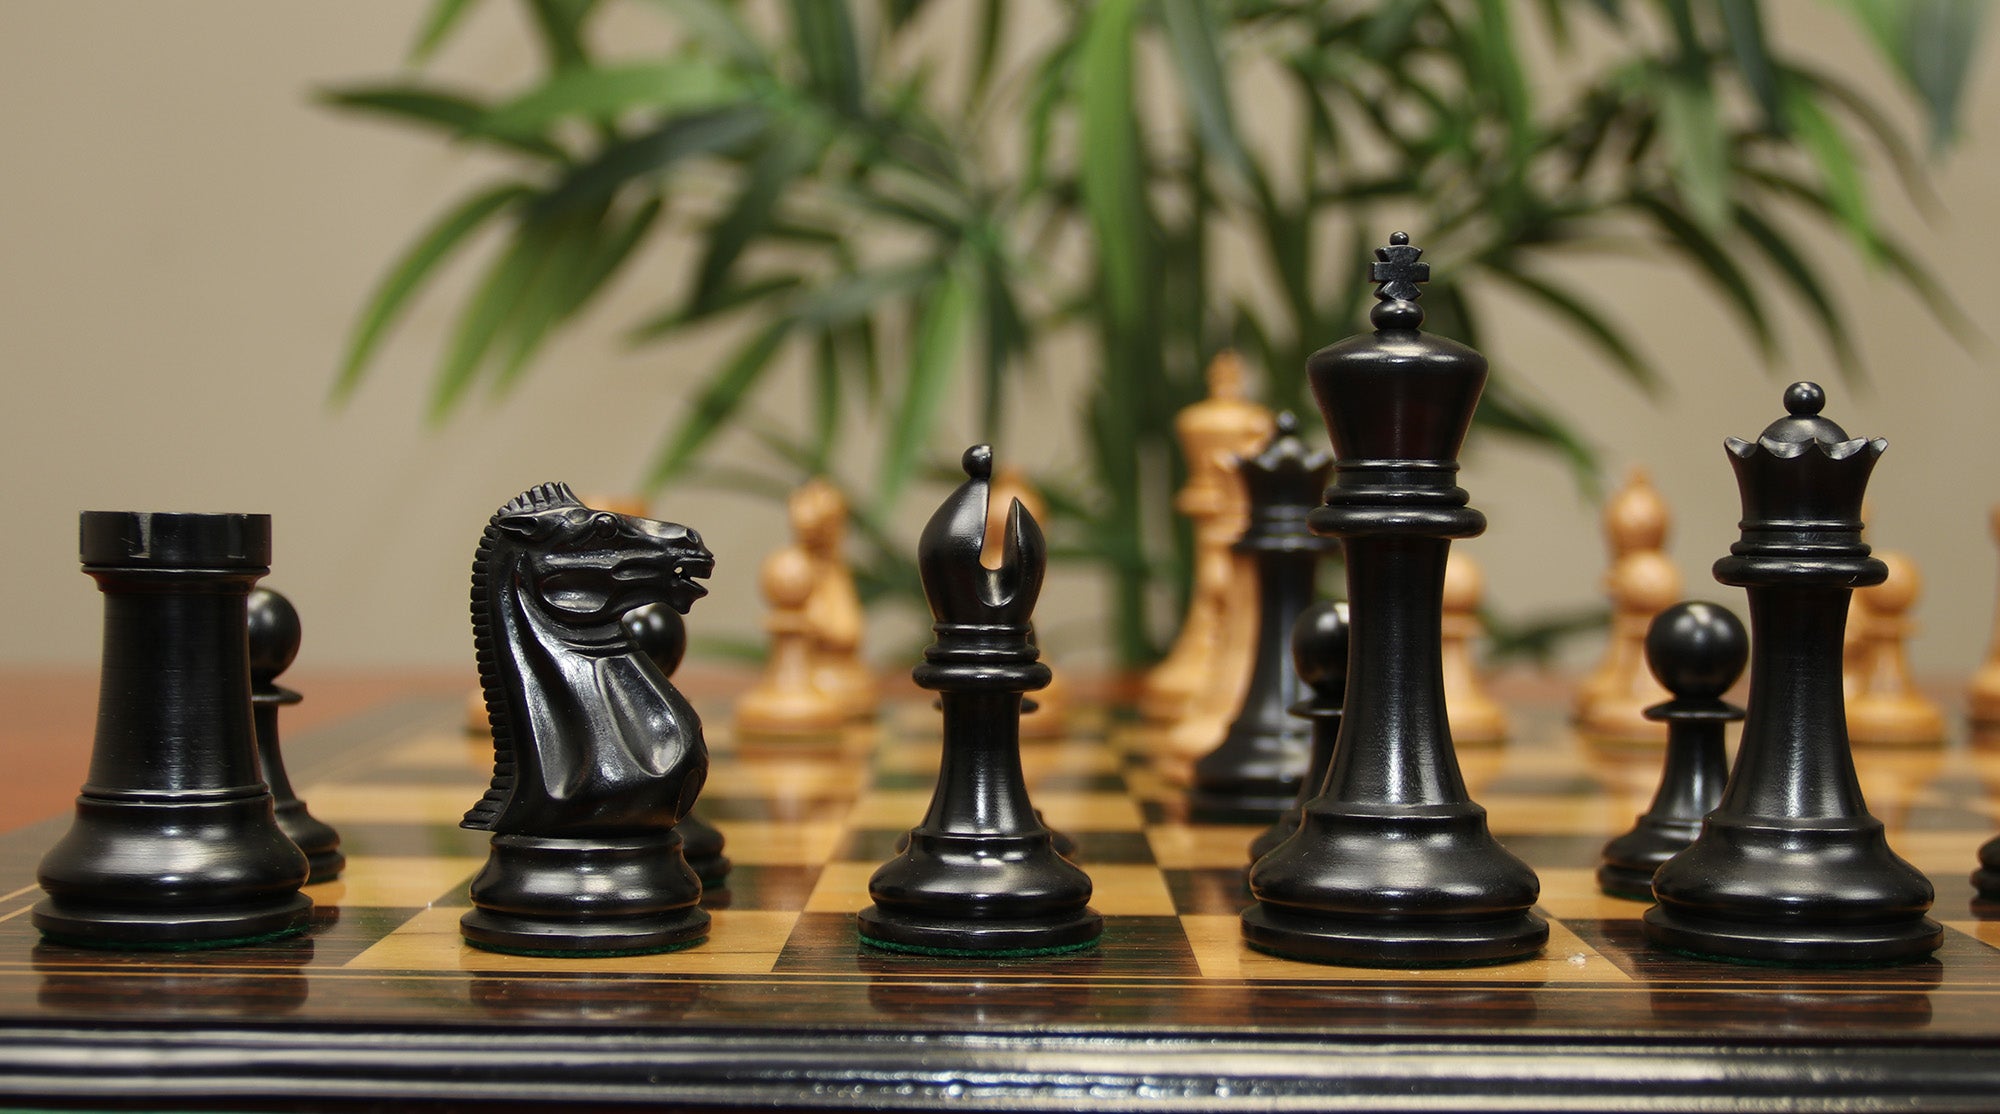 Anderson 1855-60 Reproduced 4.4" Staunton Chessmen in Distressed Boxwood & Ebonised